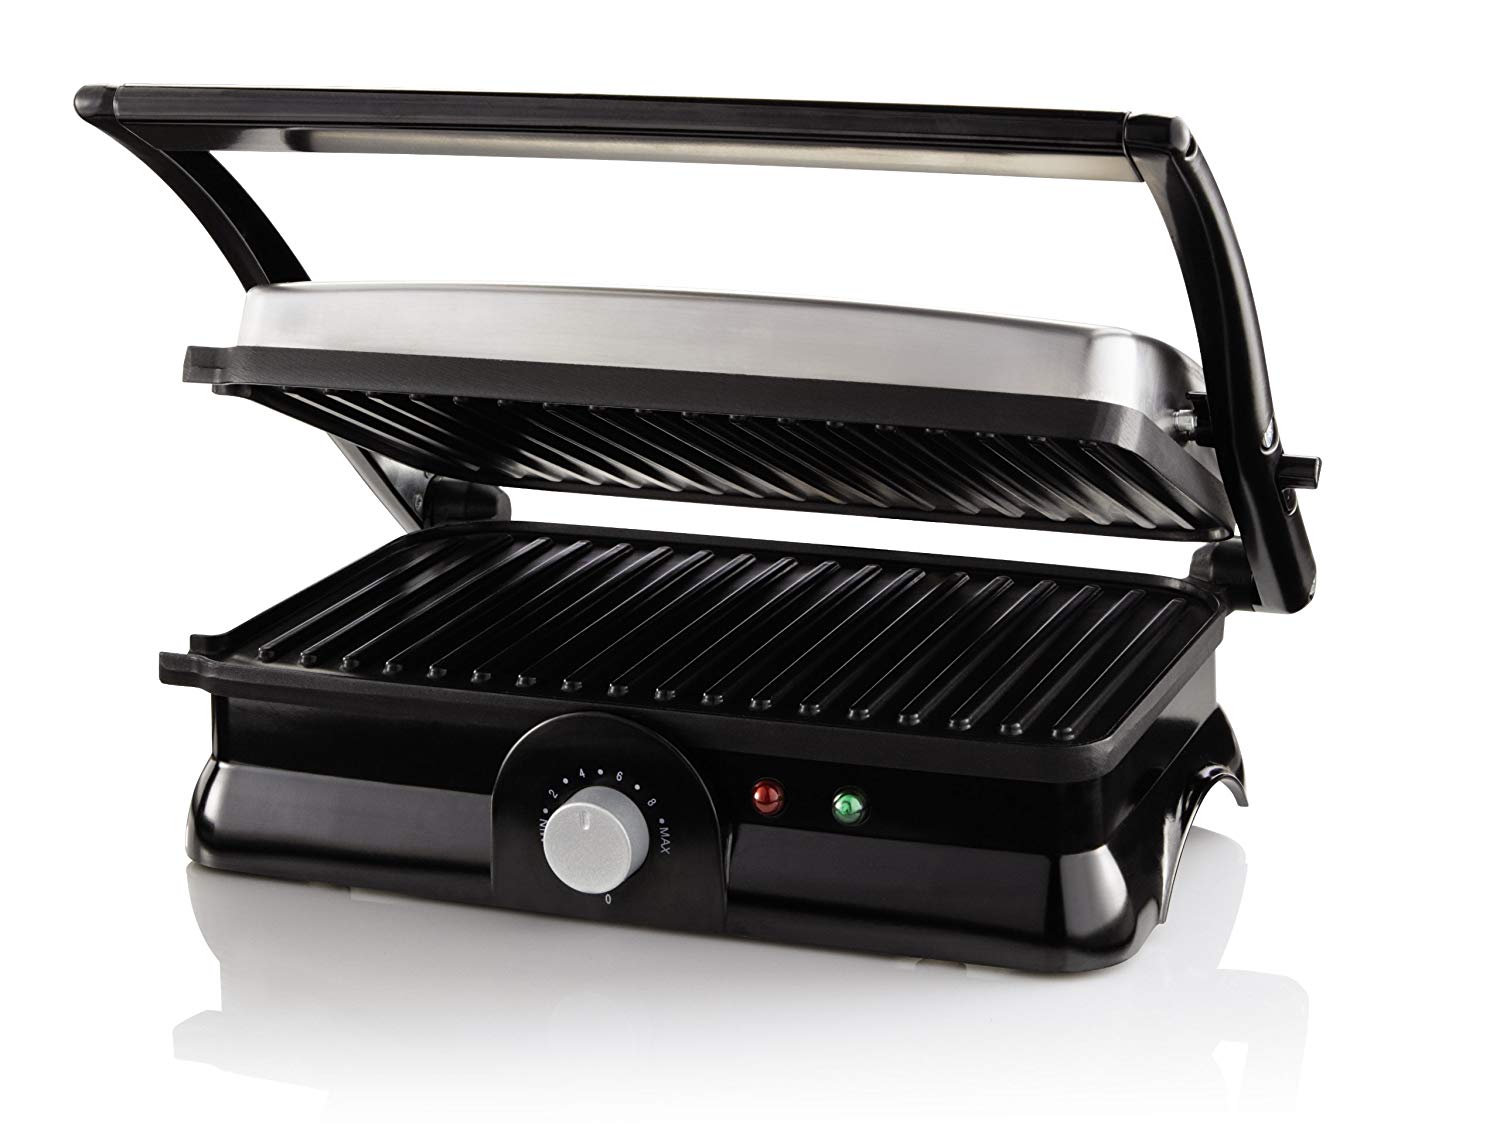 Sunbeam CKSBPM5020 2 Slice Panini Maker, Sandwich Press & Grill with floating hinge for variable thickness (13.9" x 12.3" x 6")